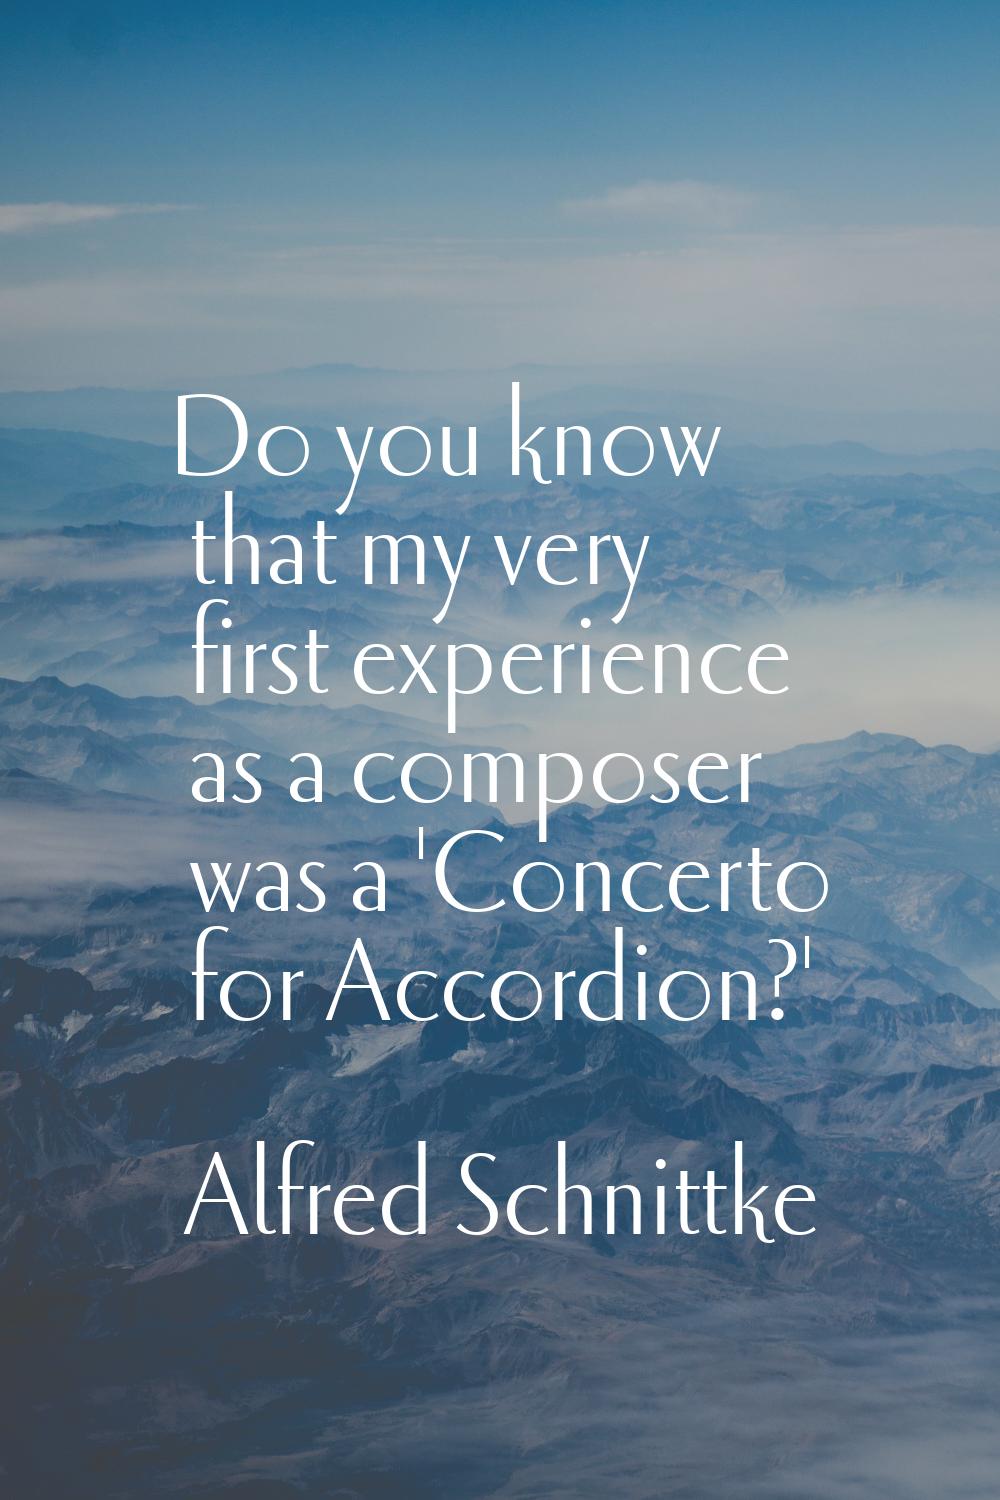 Do you know that my very first experience as a composer was a 'Concerto for Accordion?'